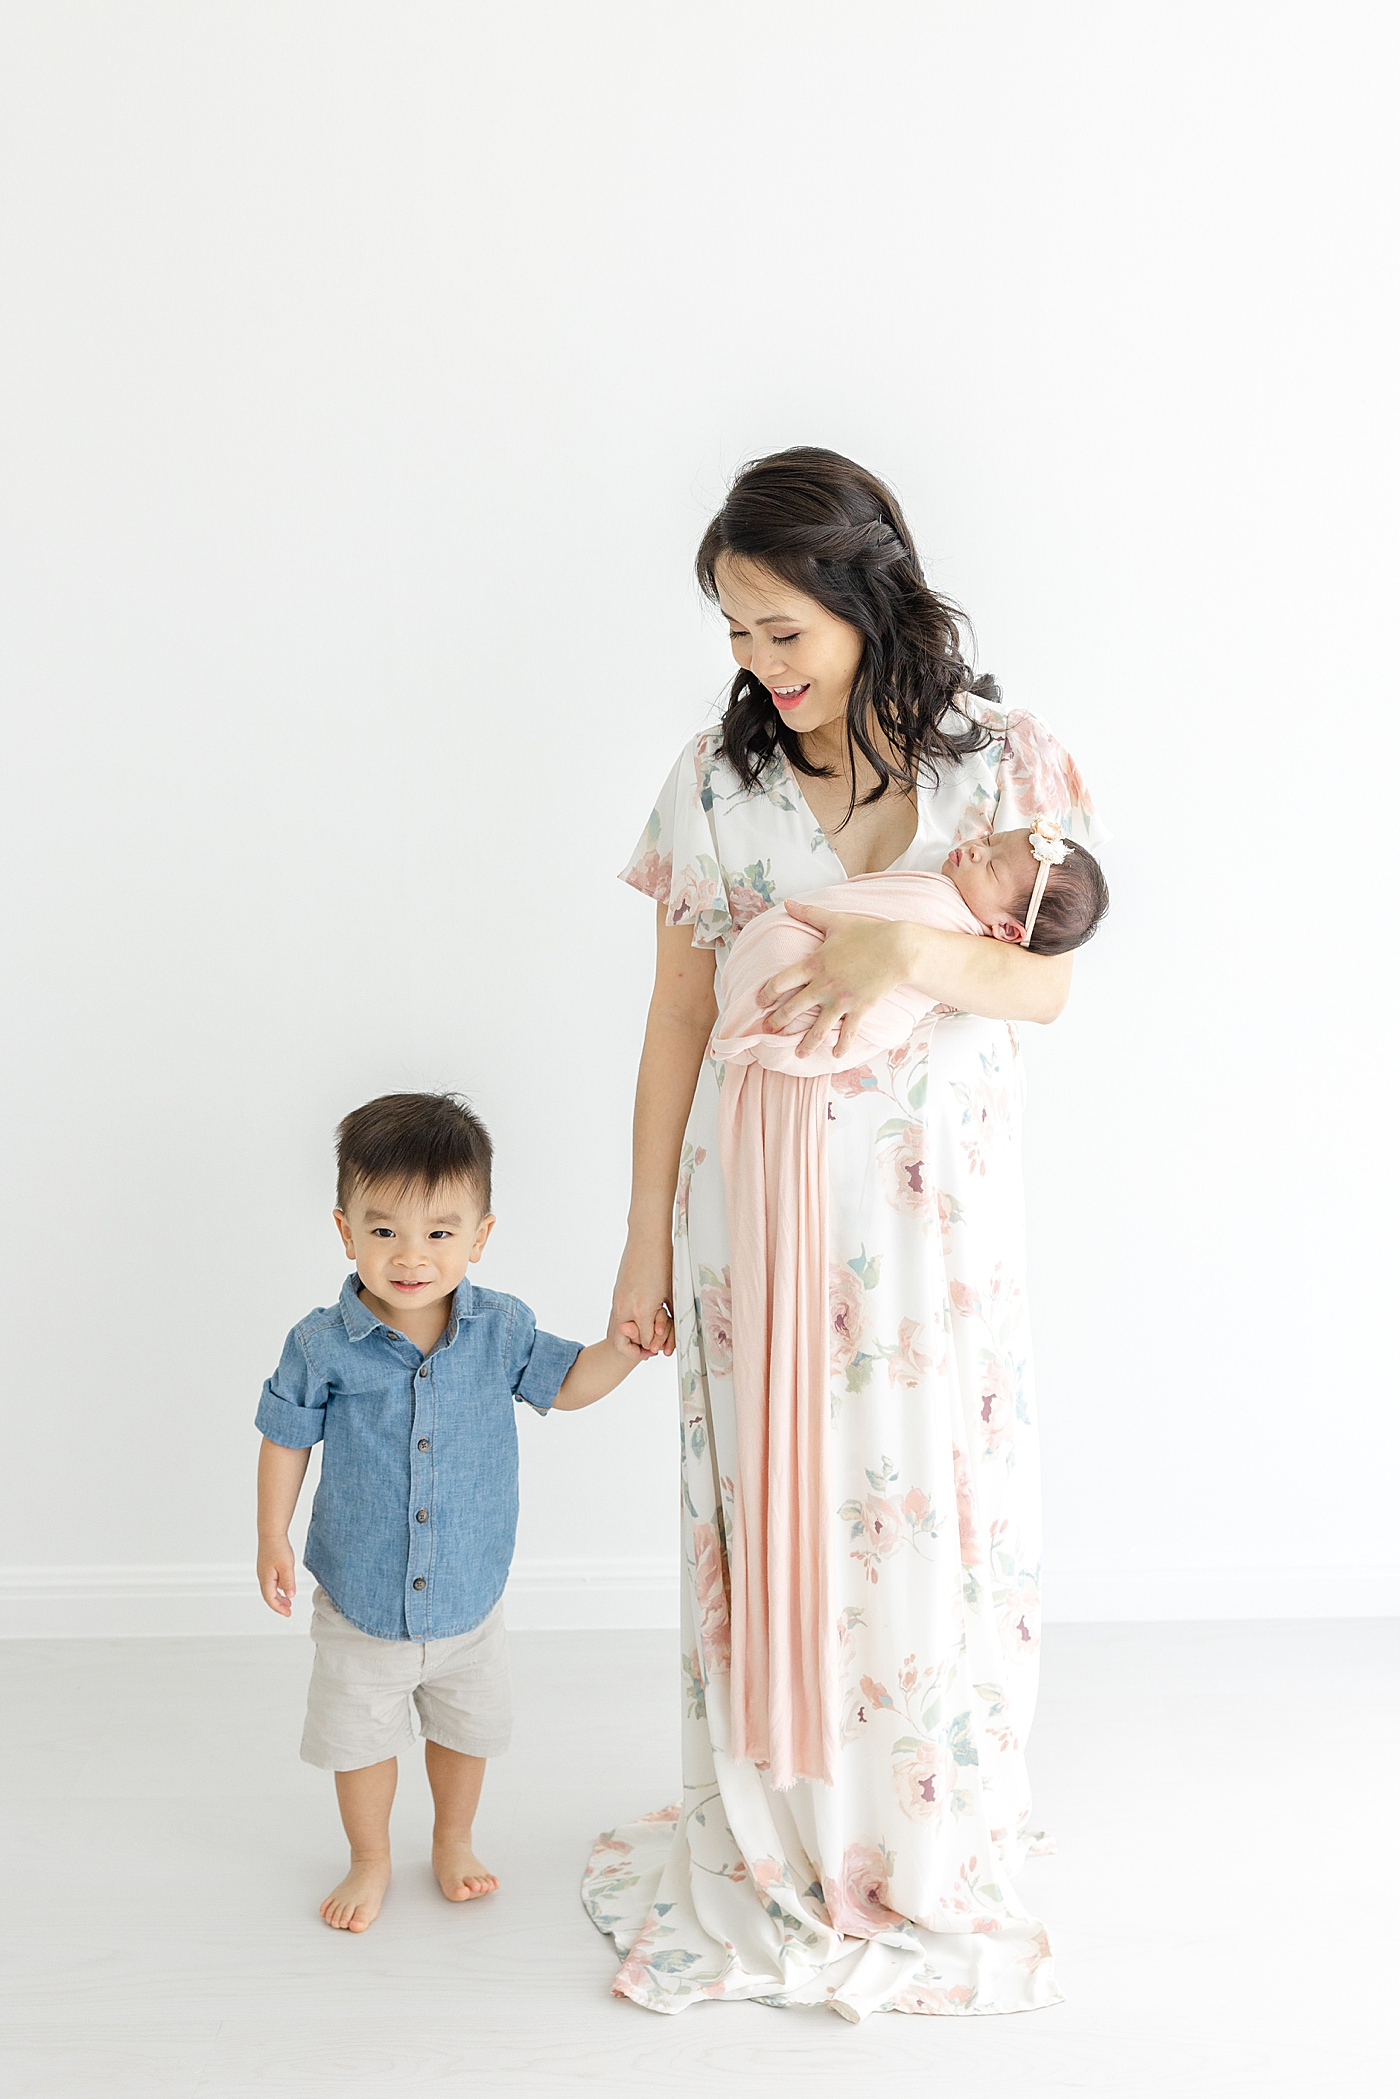 Mom holding her little boys hand and holding her newborn during her Newborn sessions with siblings | Image by Sana Ahmed